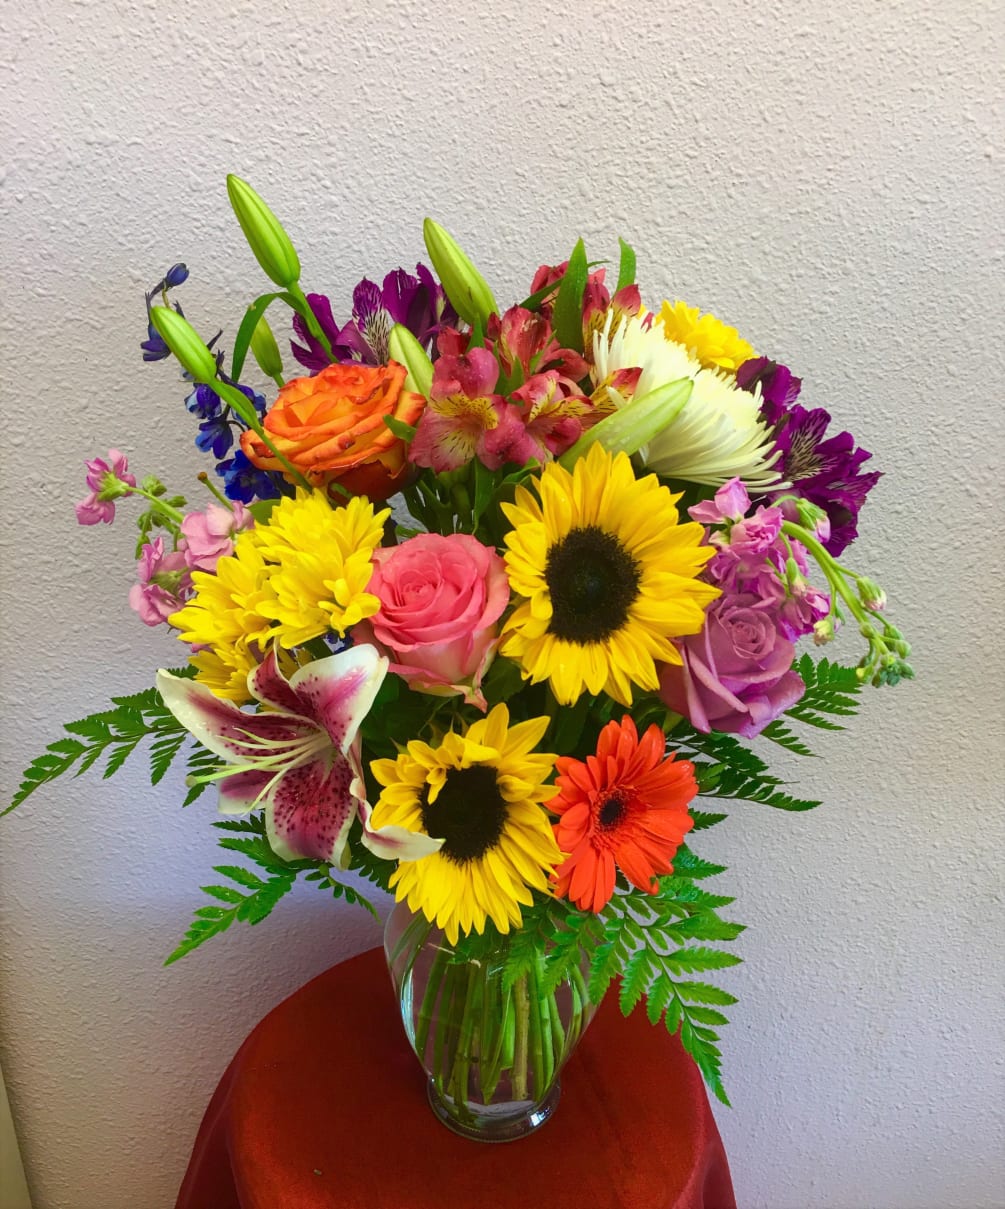 A colorful arrangement containing sunflowers, roses, lilies, gerbs, etc..